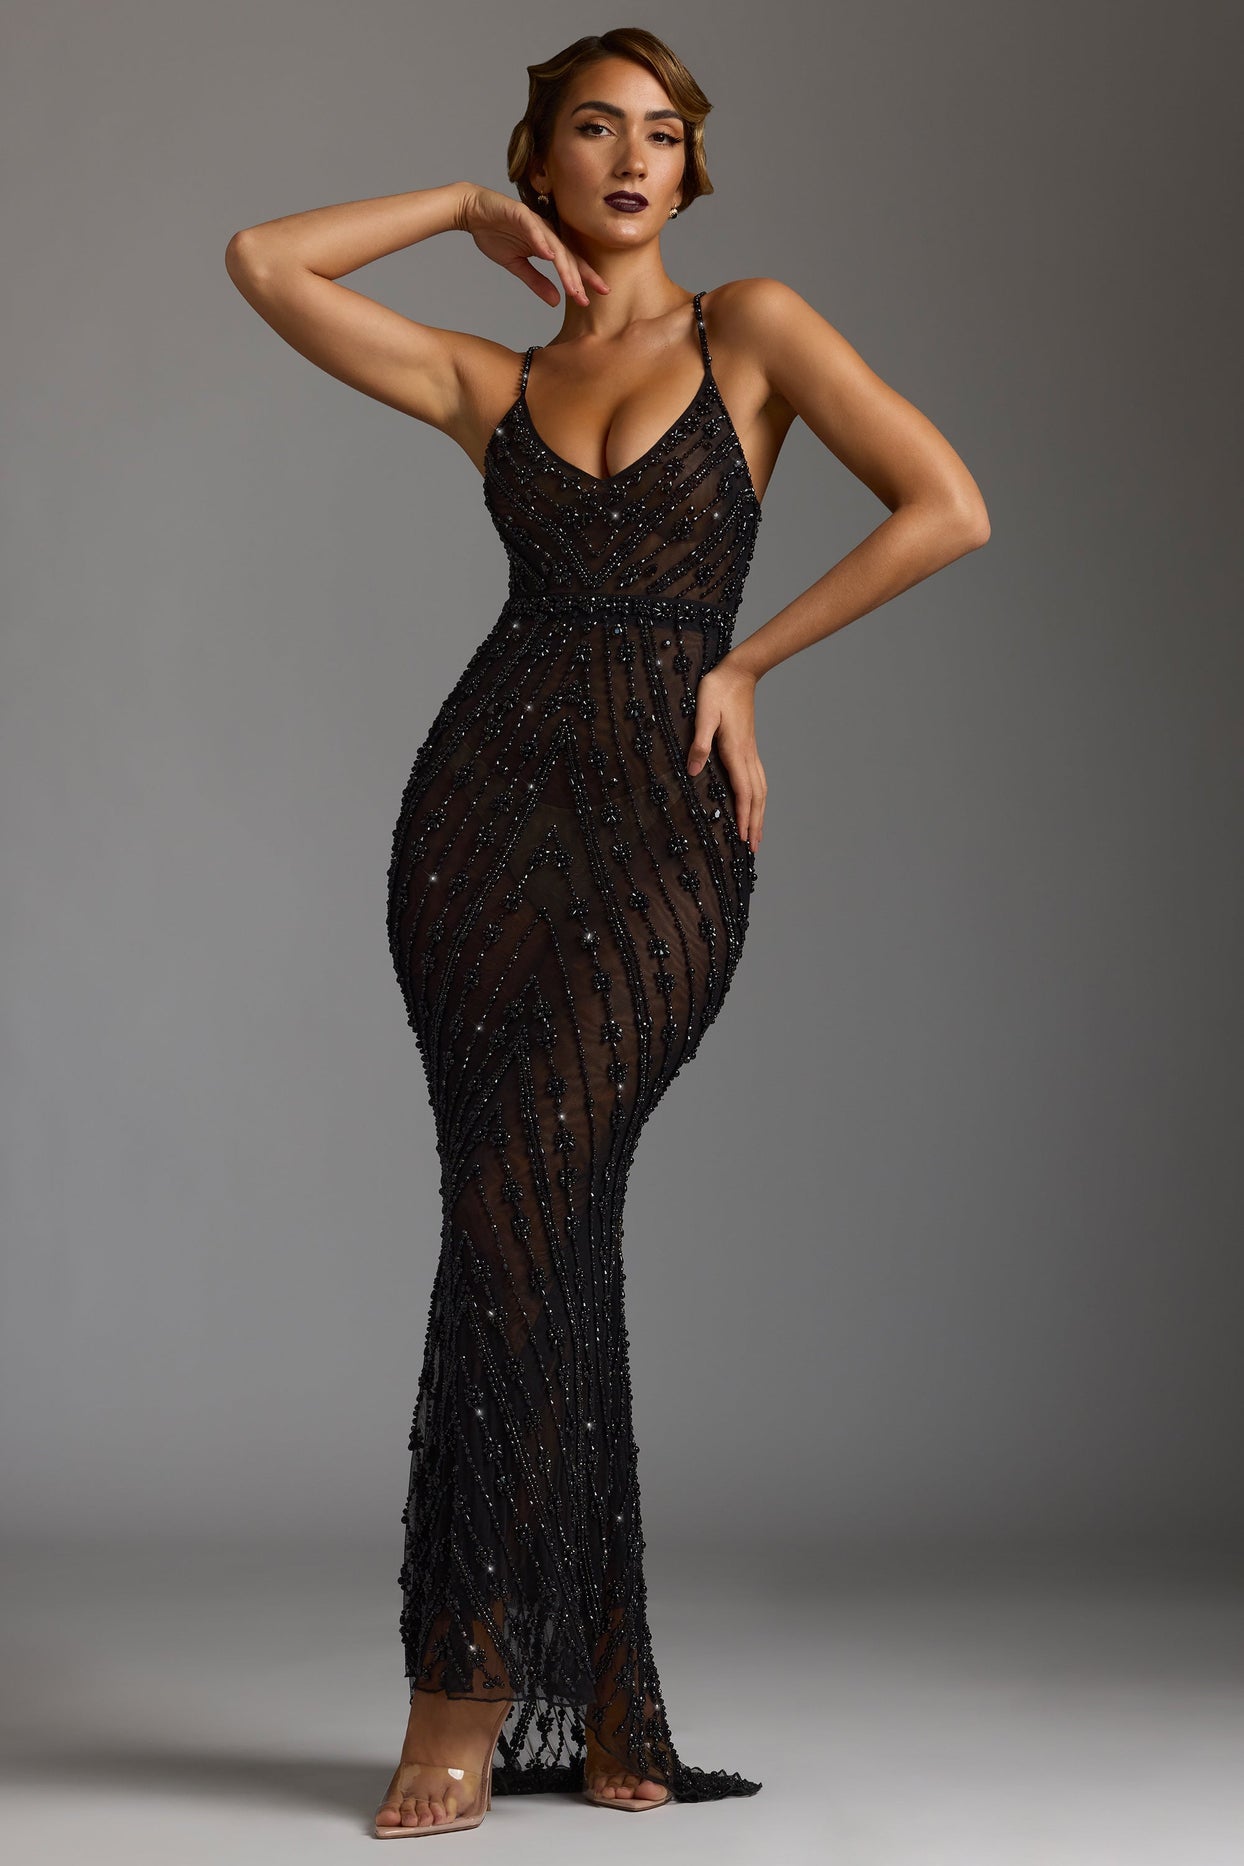 Giorgia Hand Embellished Sheer Evening Gown in Black